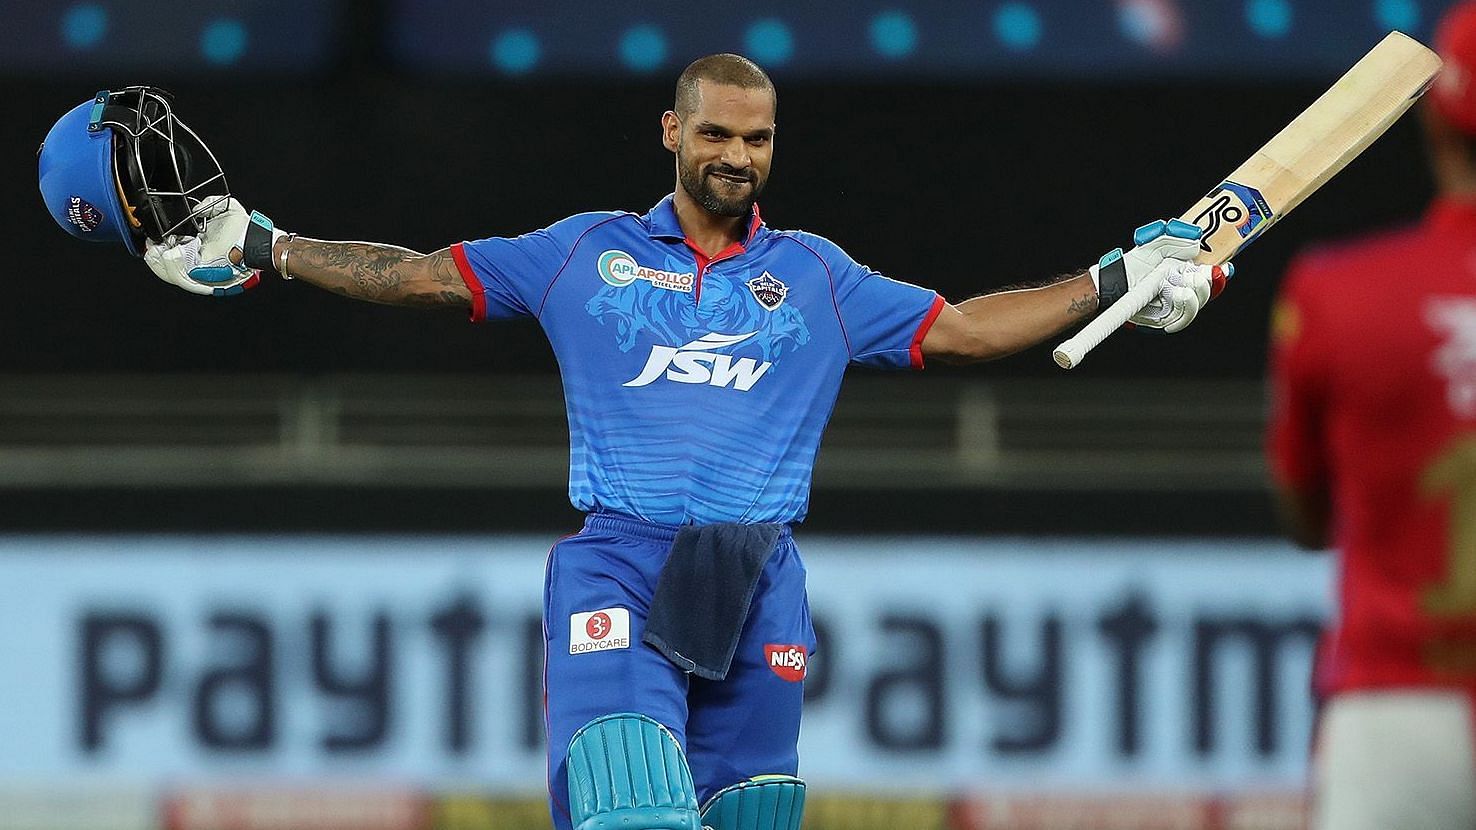 Shikhar Dhawan became the first player to score two centuries in consecutive matches in the IPL.